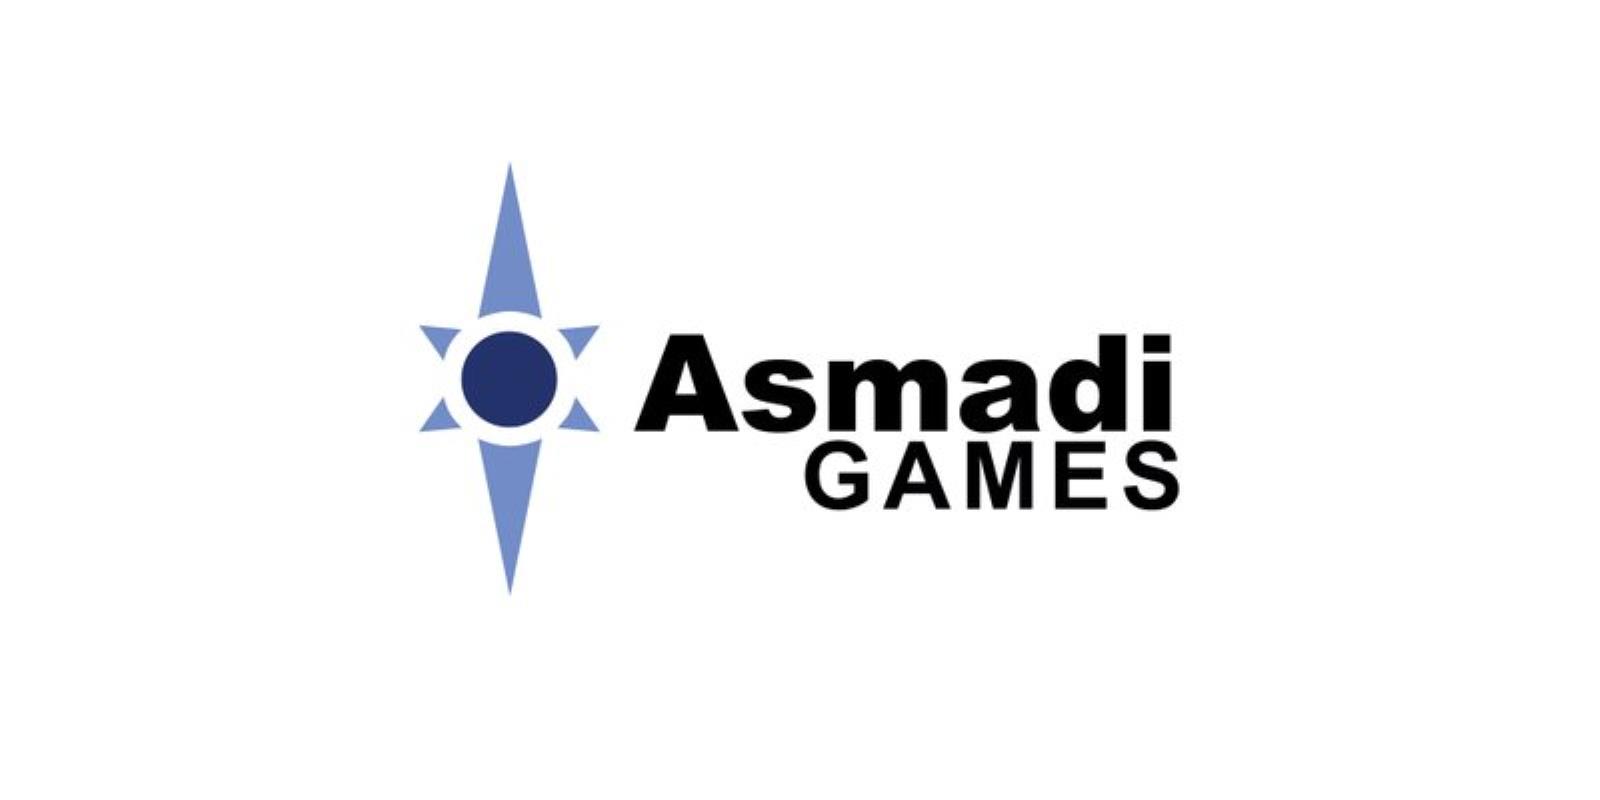 Innovation Figures in the Sand Game Expansion Asmadi Games ASI0102 NEW SEALED 